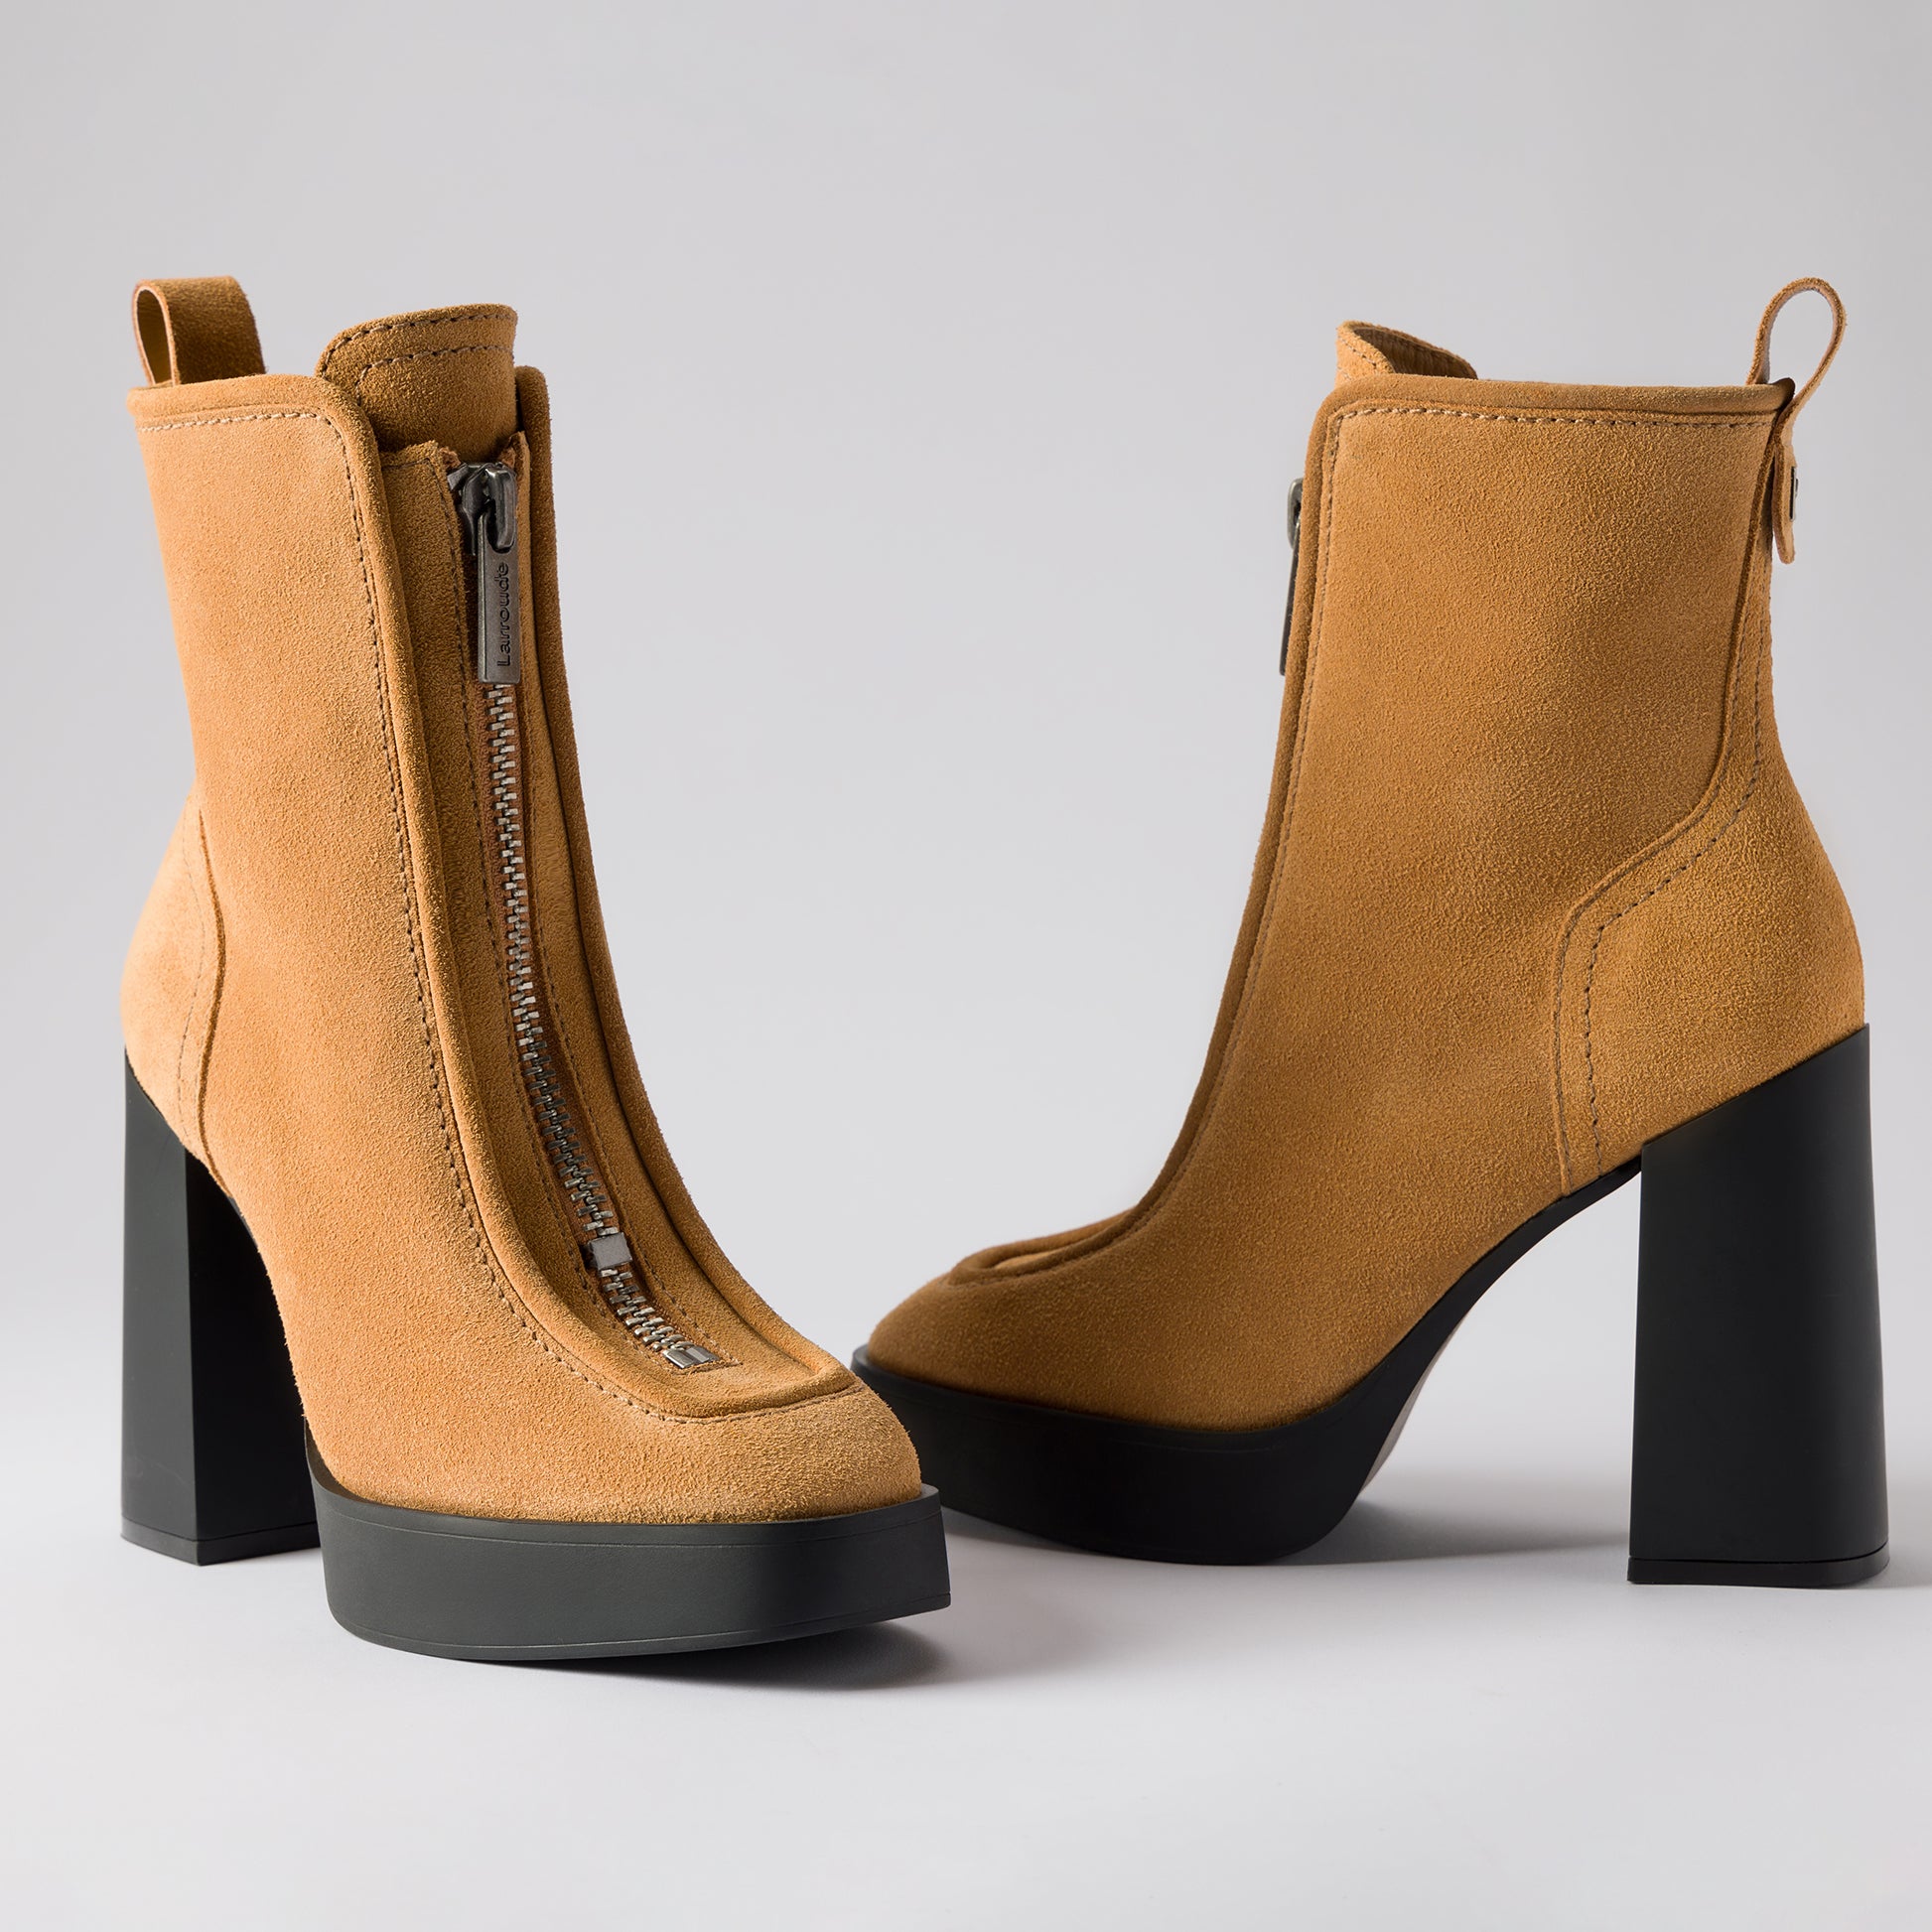 Nicole Hi Boot In Toasted Suede